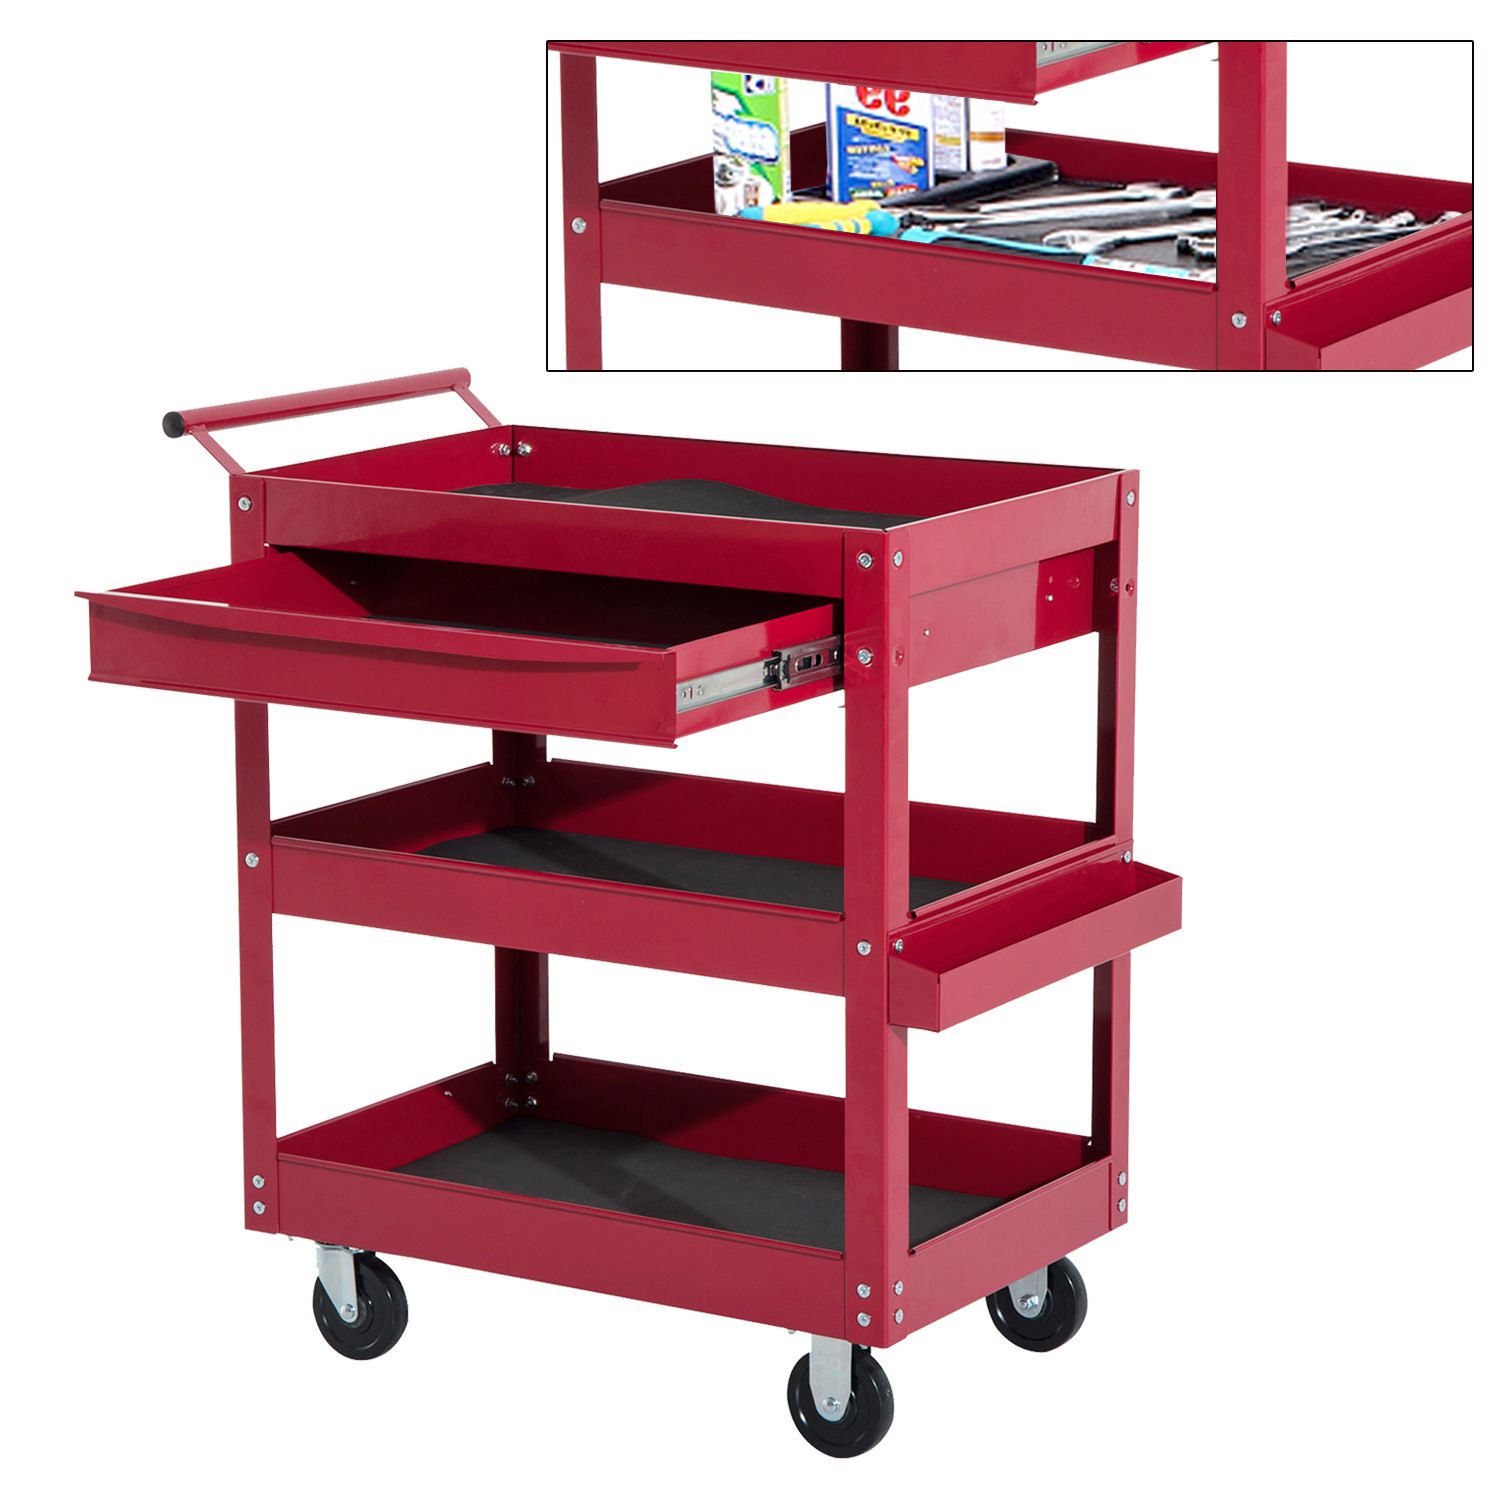 Proto Heavy Duty Utility Cart- 3 Drawer Red, j559000-3rd.